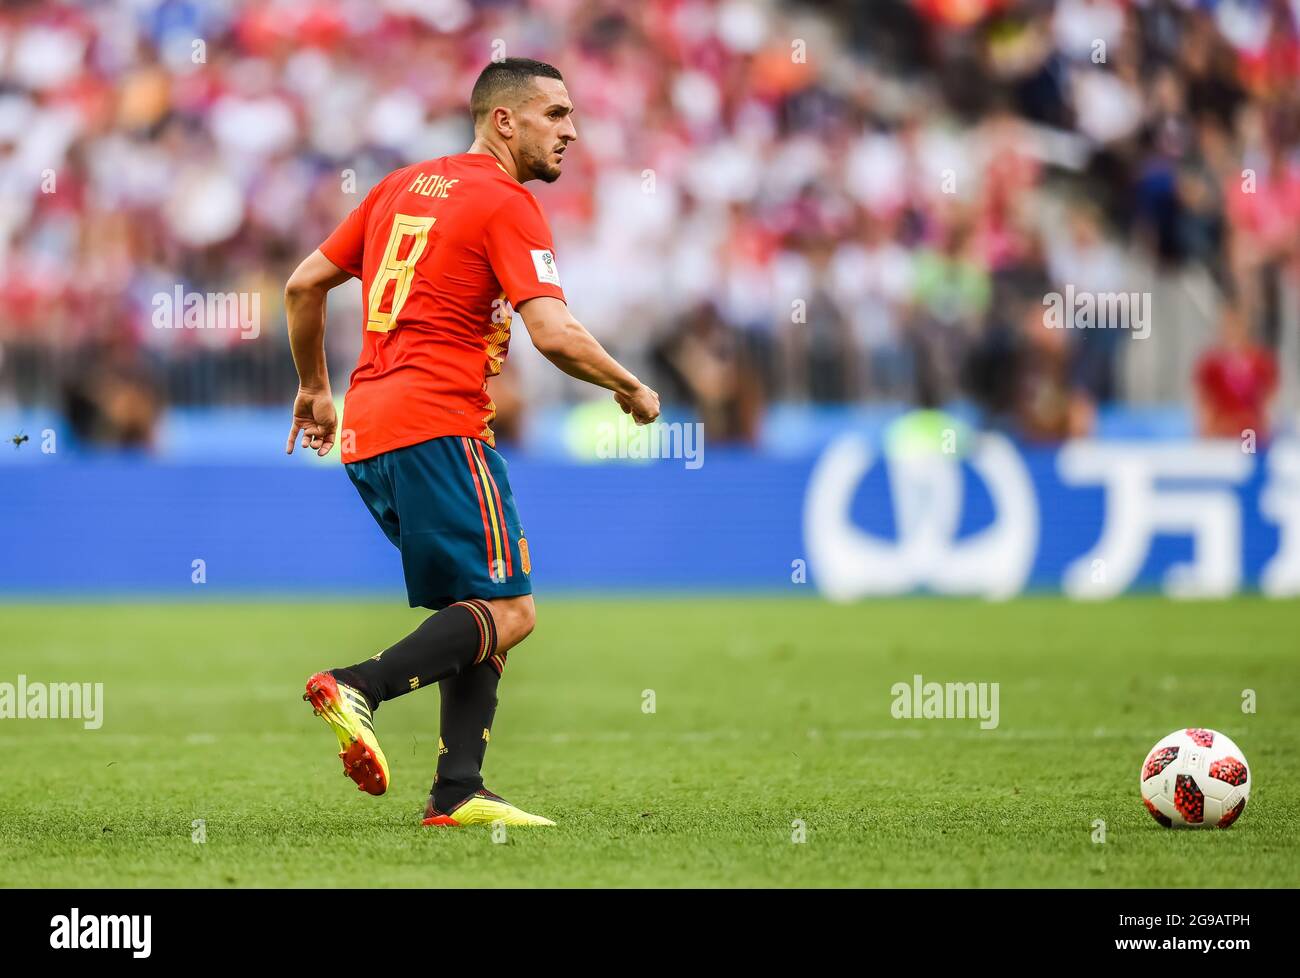 Moscow, Russia - July 1, 2018. Spain national football team midfielder Koke during FIFA World Cup 2018 Round of 16 match Spain vs Russia Stock Photo